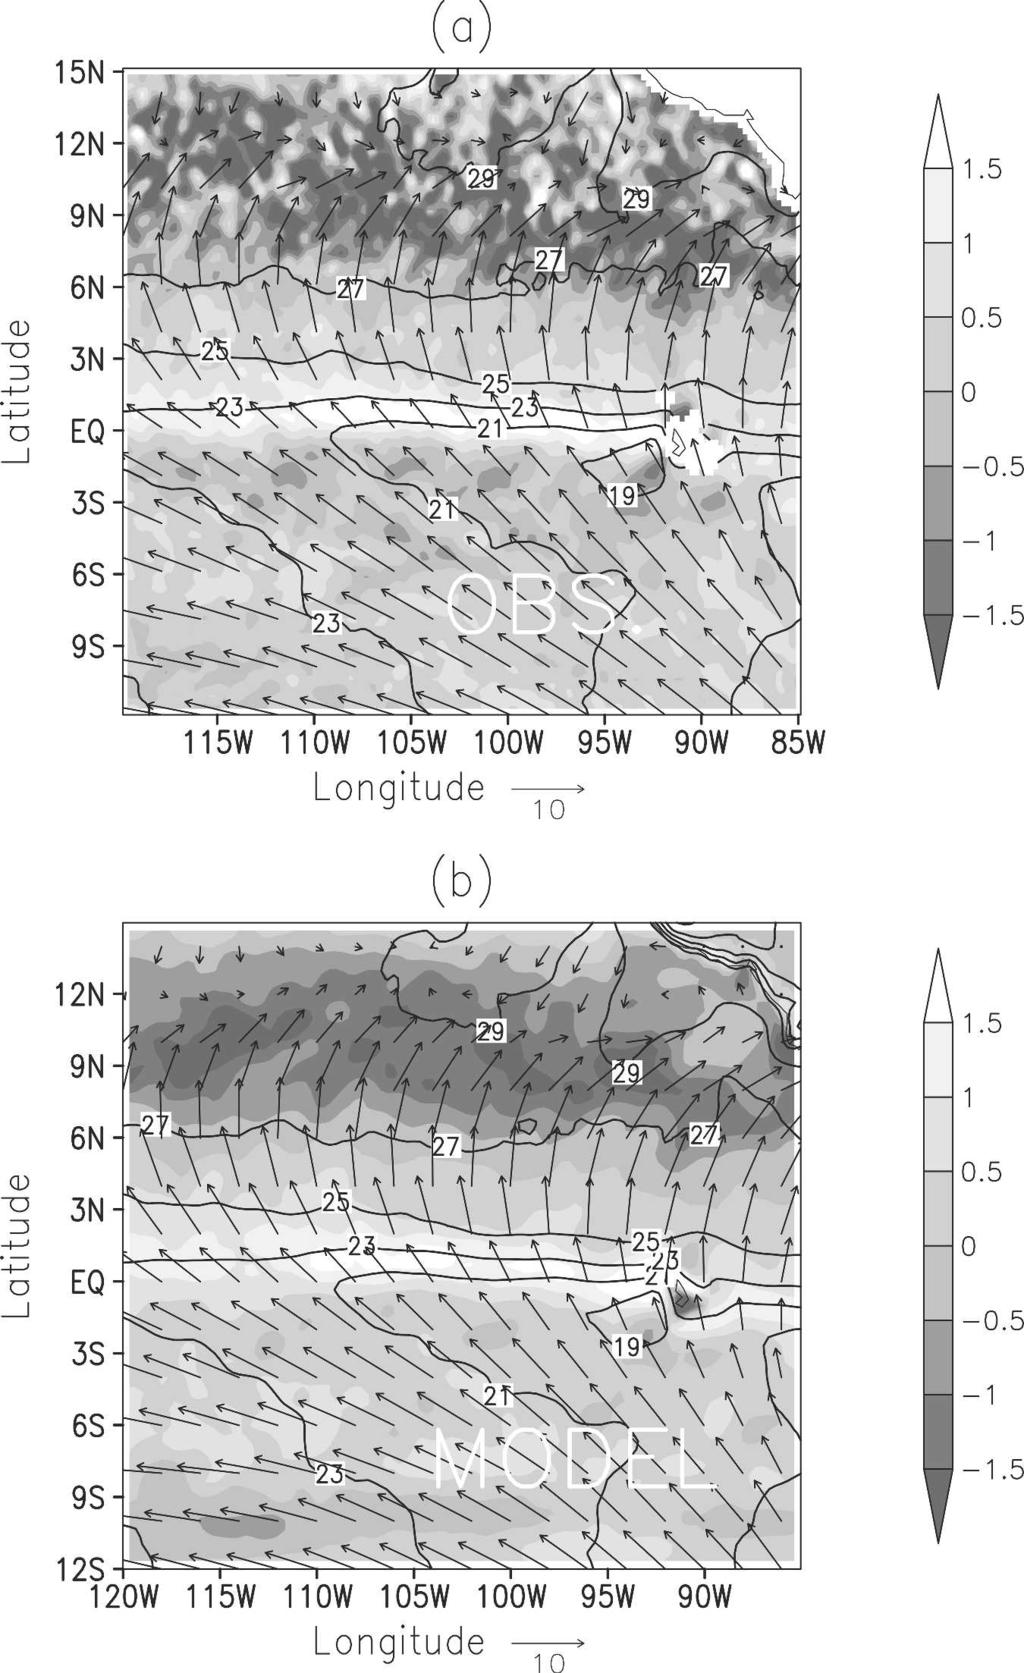 JUNE 2005 S M A L L E T A L. 1817 FIG. 2. Divergence of neutral equivalent 10-m mean wind (10 5 s 1, grayscale), SST ( C, line contours), and wind vectors (m s 1, see scale arrow) for a 2-month time mean, Sep Oct 2001.